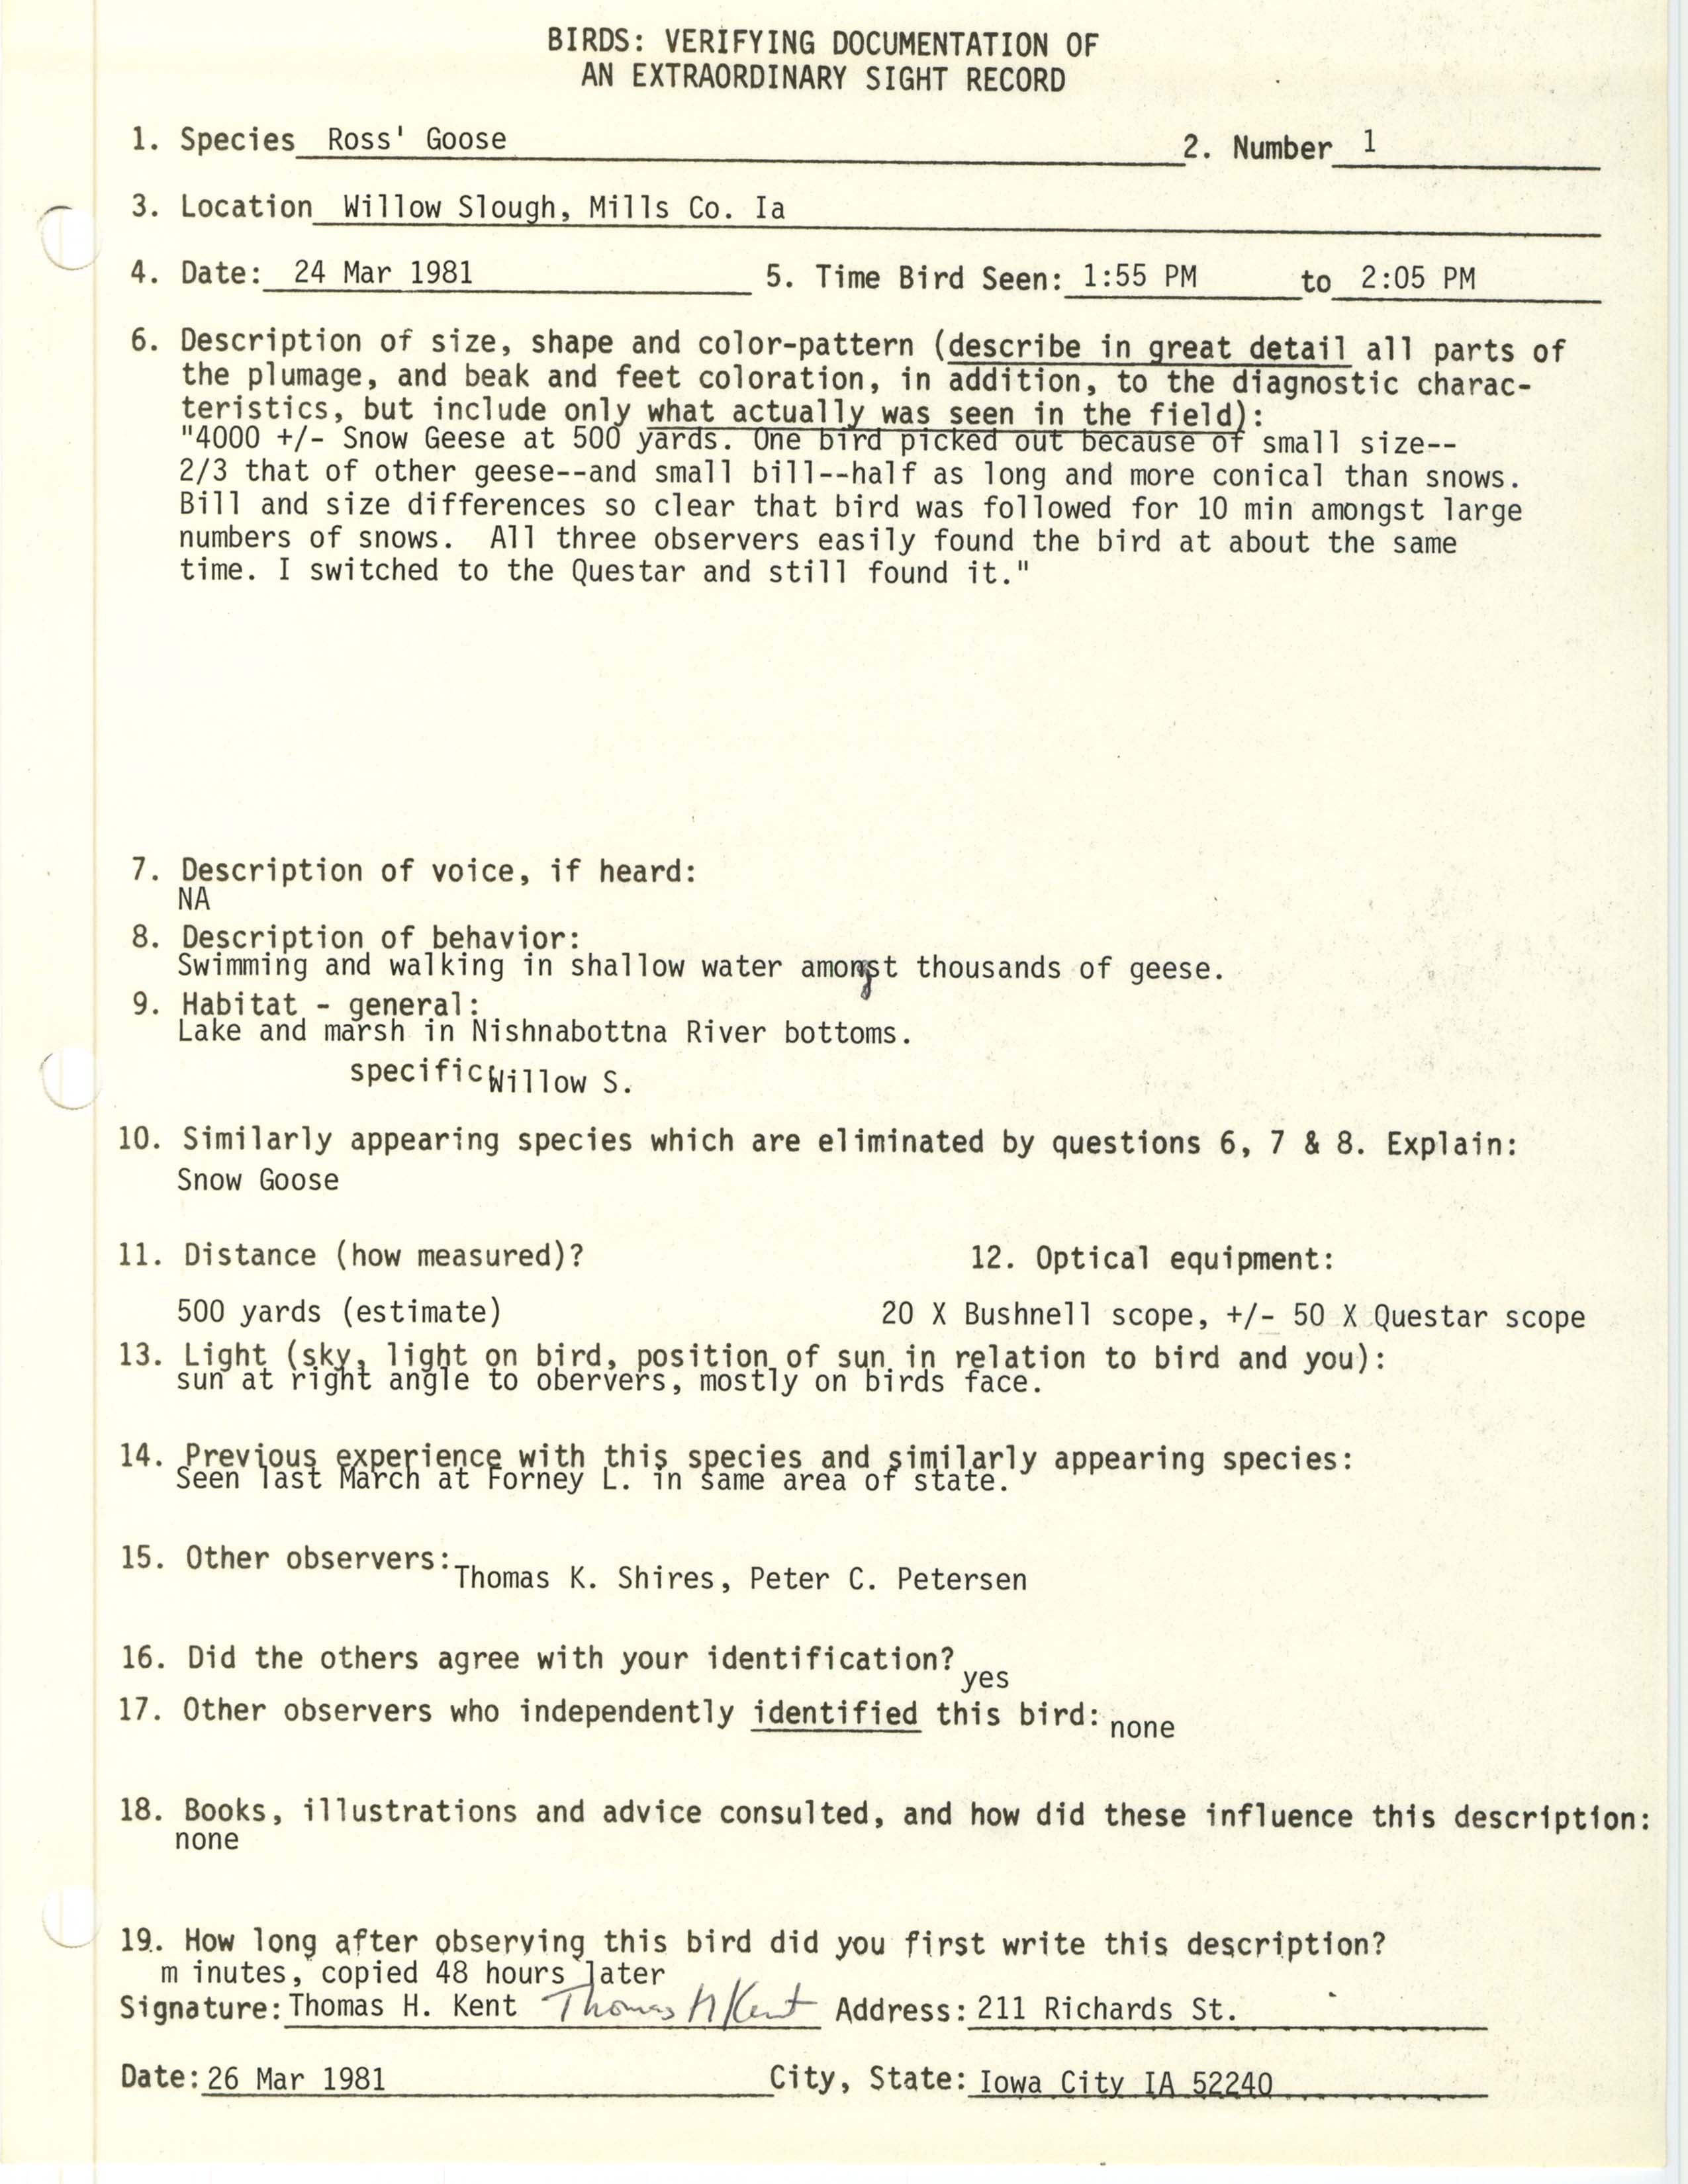 Rare bird documentation form for Ross' Goose at Willow Slough, 1981